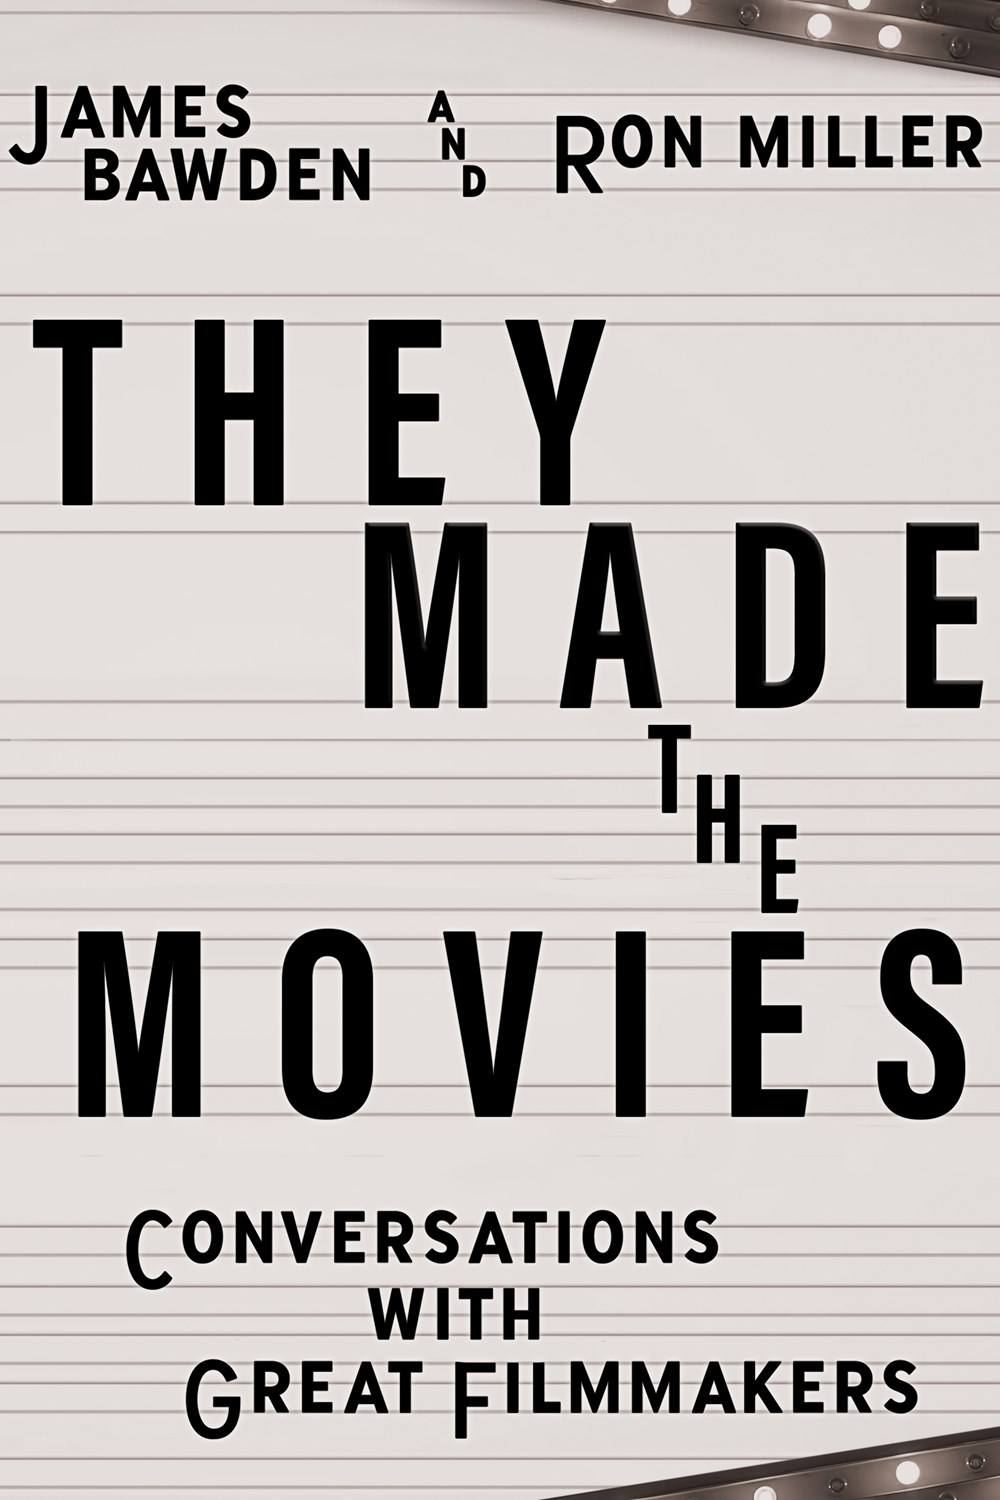 They Made the Movies: Conversations with Great Filmmakers